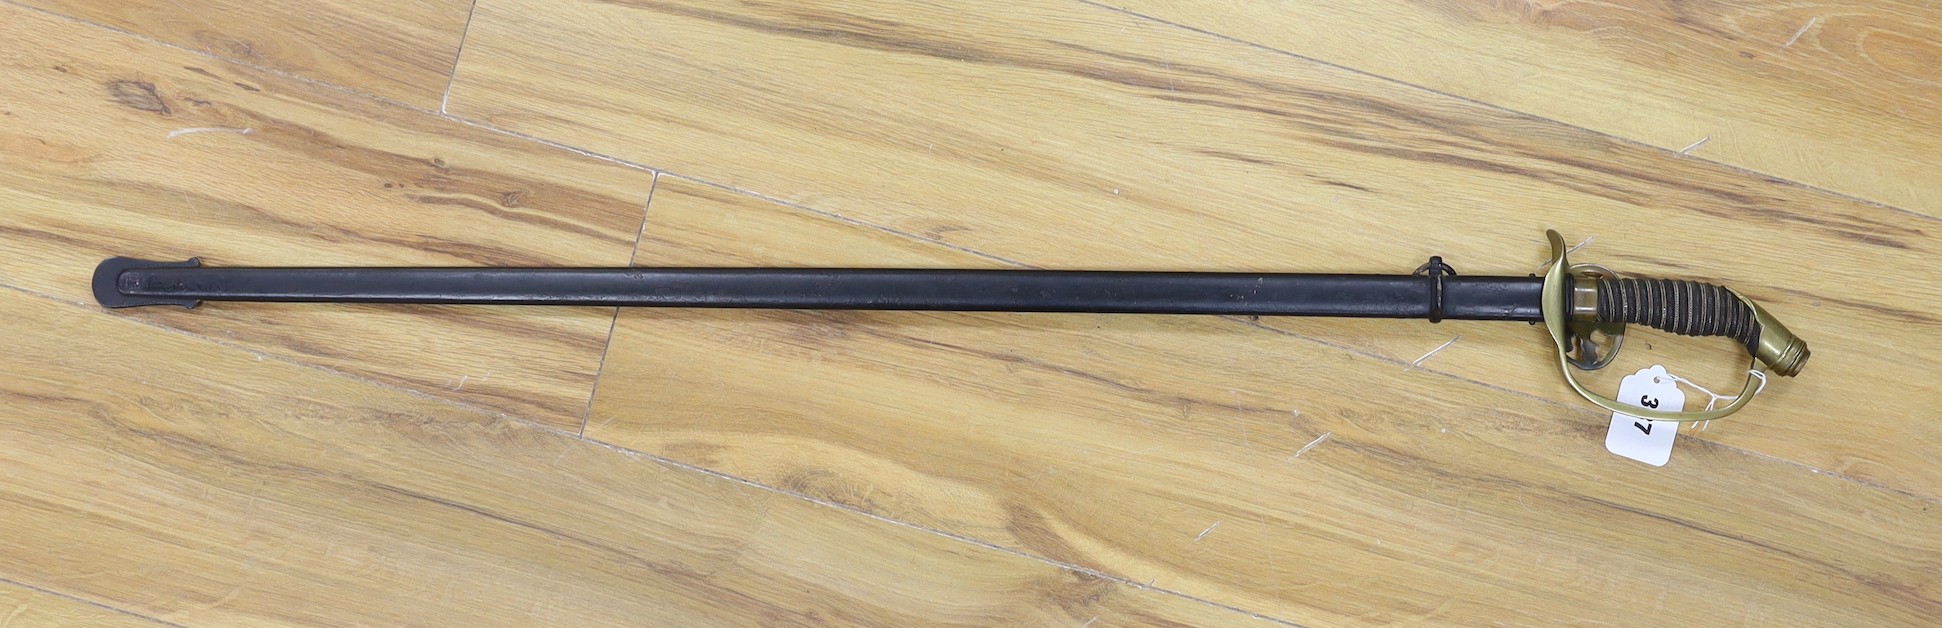 A late 19th century Imperial German/Prussian infantry officer's sabre and scabbard 97cm total length